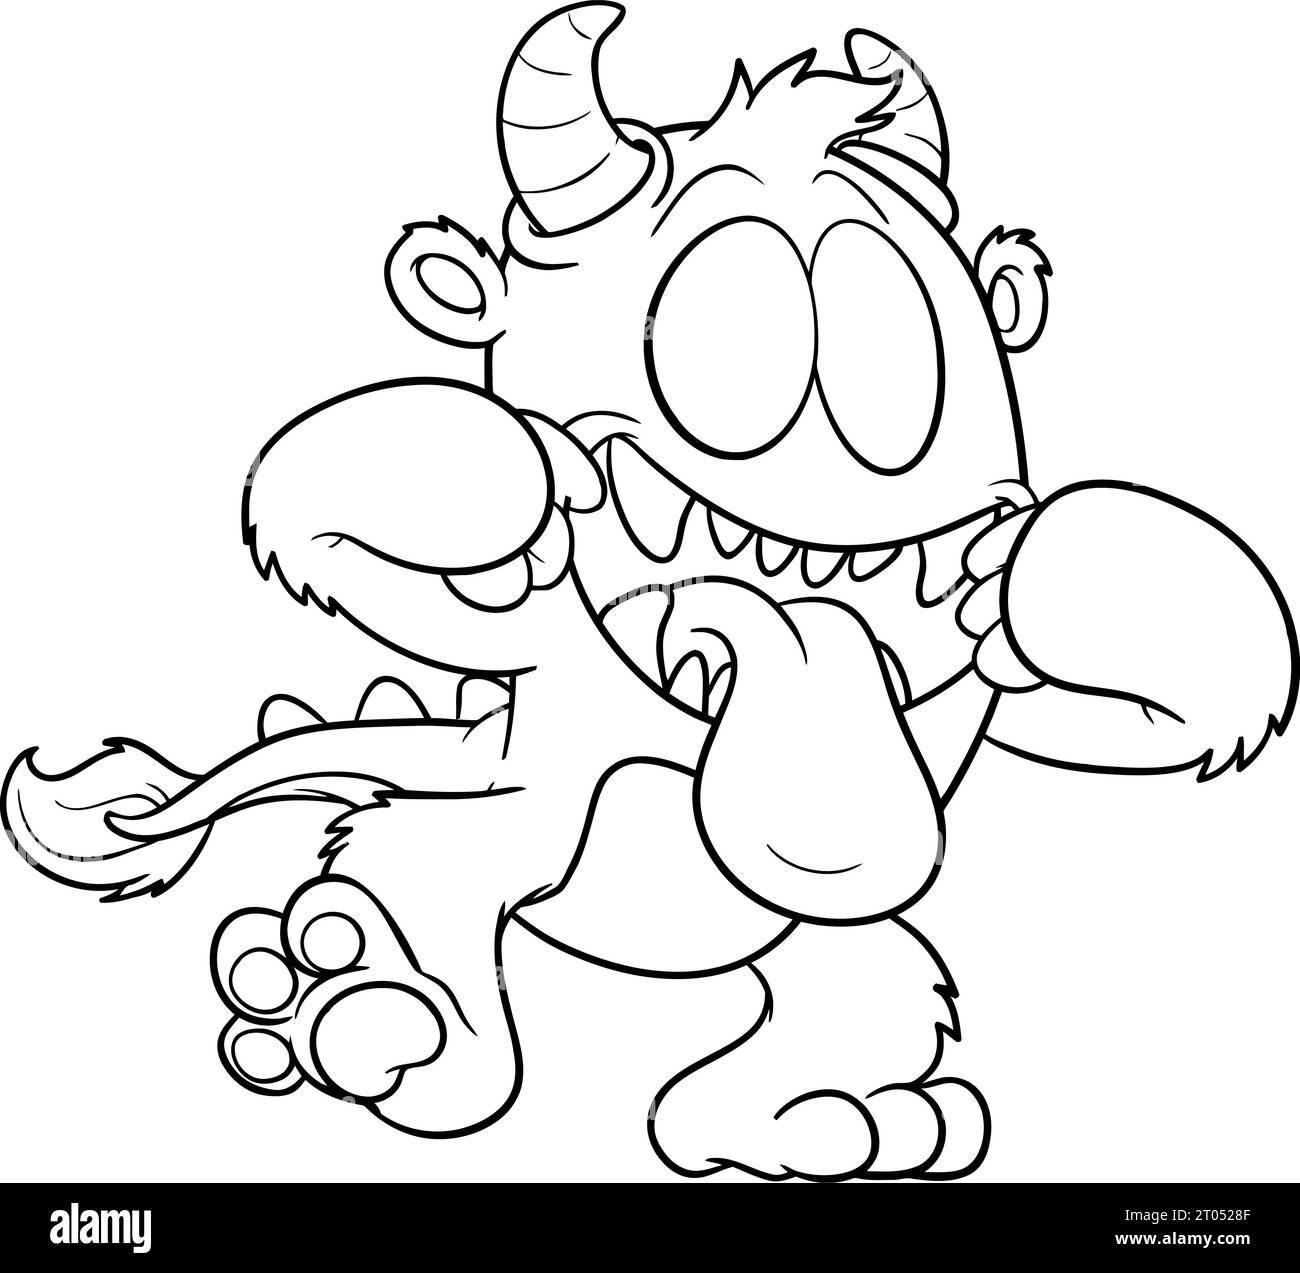 Cute Cartoon monster coloring page for kids Stock Photo